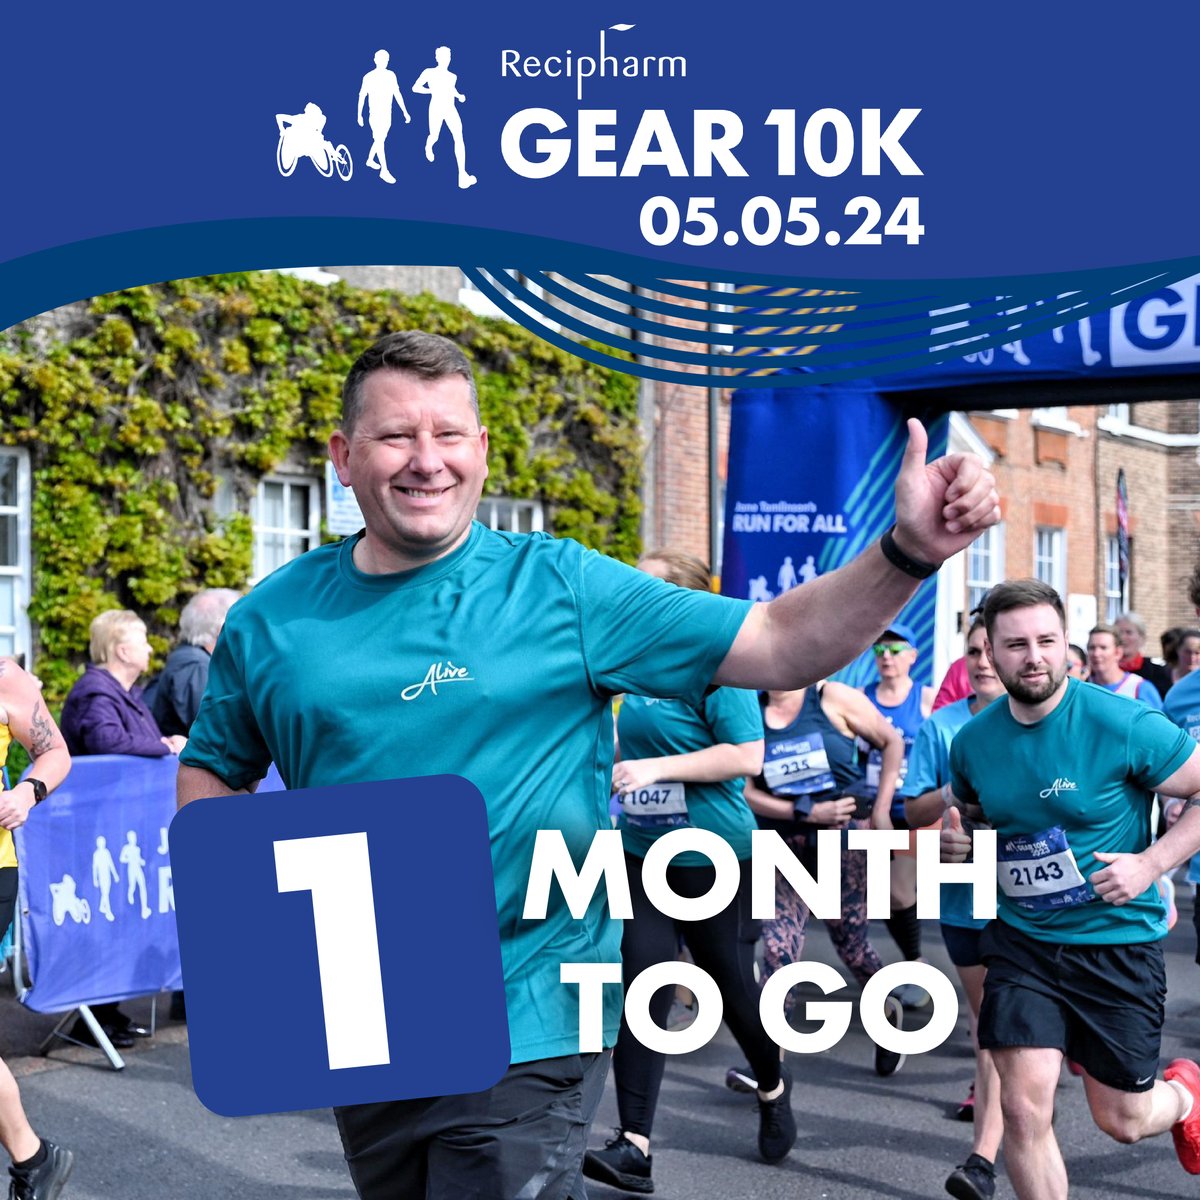 Recipharm GEAR 10K is not far away⏳ You don't want to miss this event. Join us for the 10K or as a family for the Mini GEAR Sign up now at Runforall.com or click the link in our bio. #runforall #GEAR10K